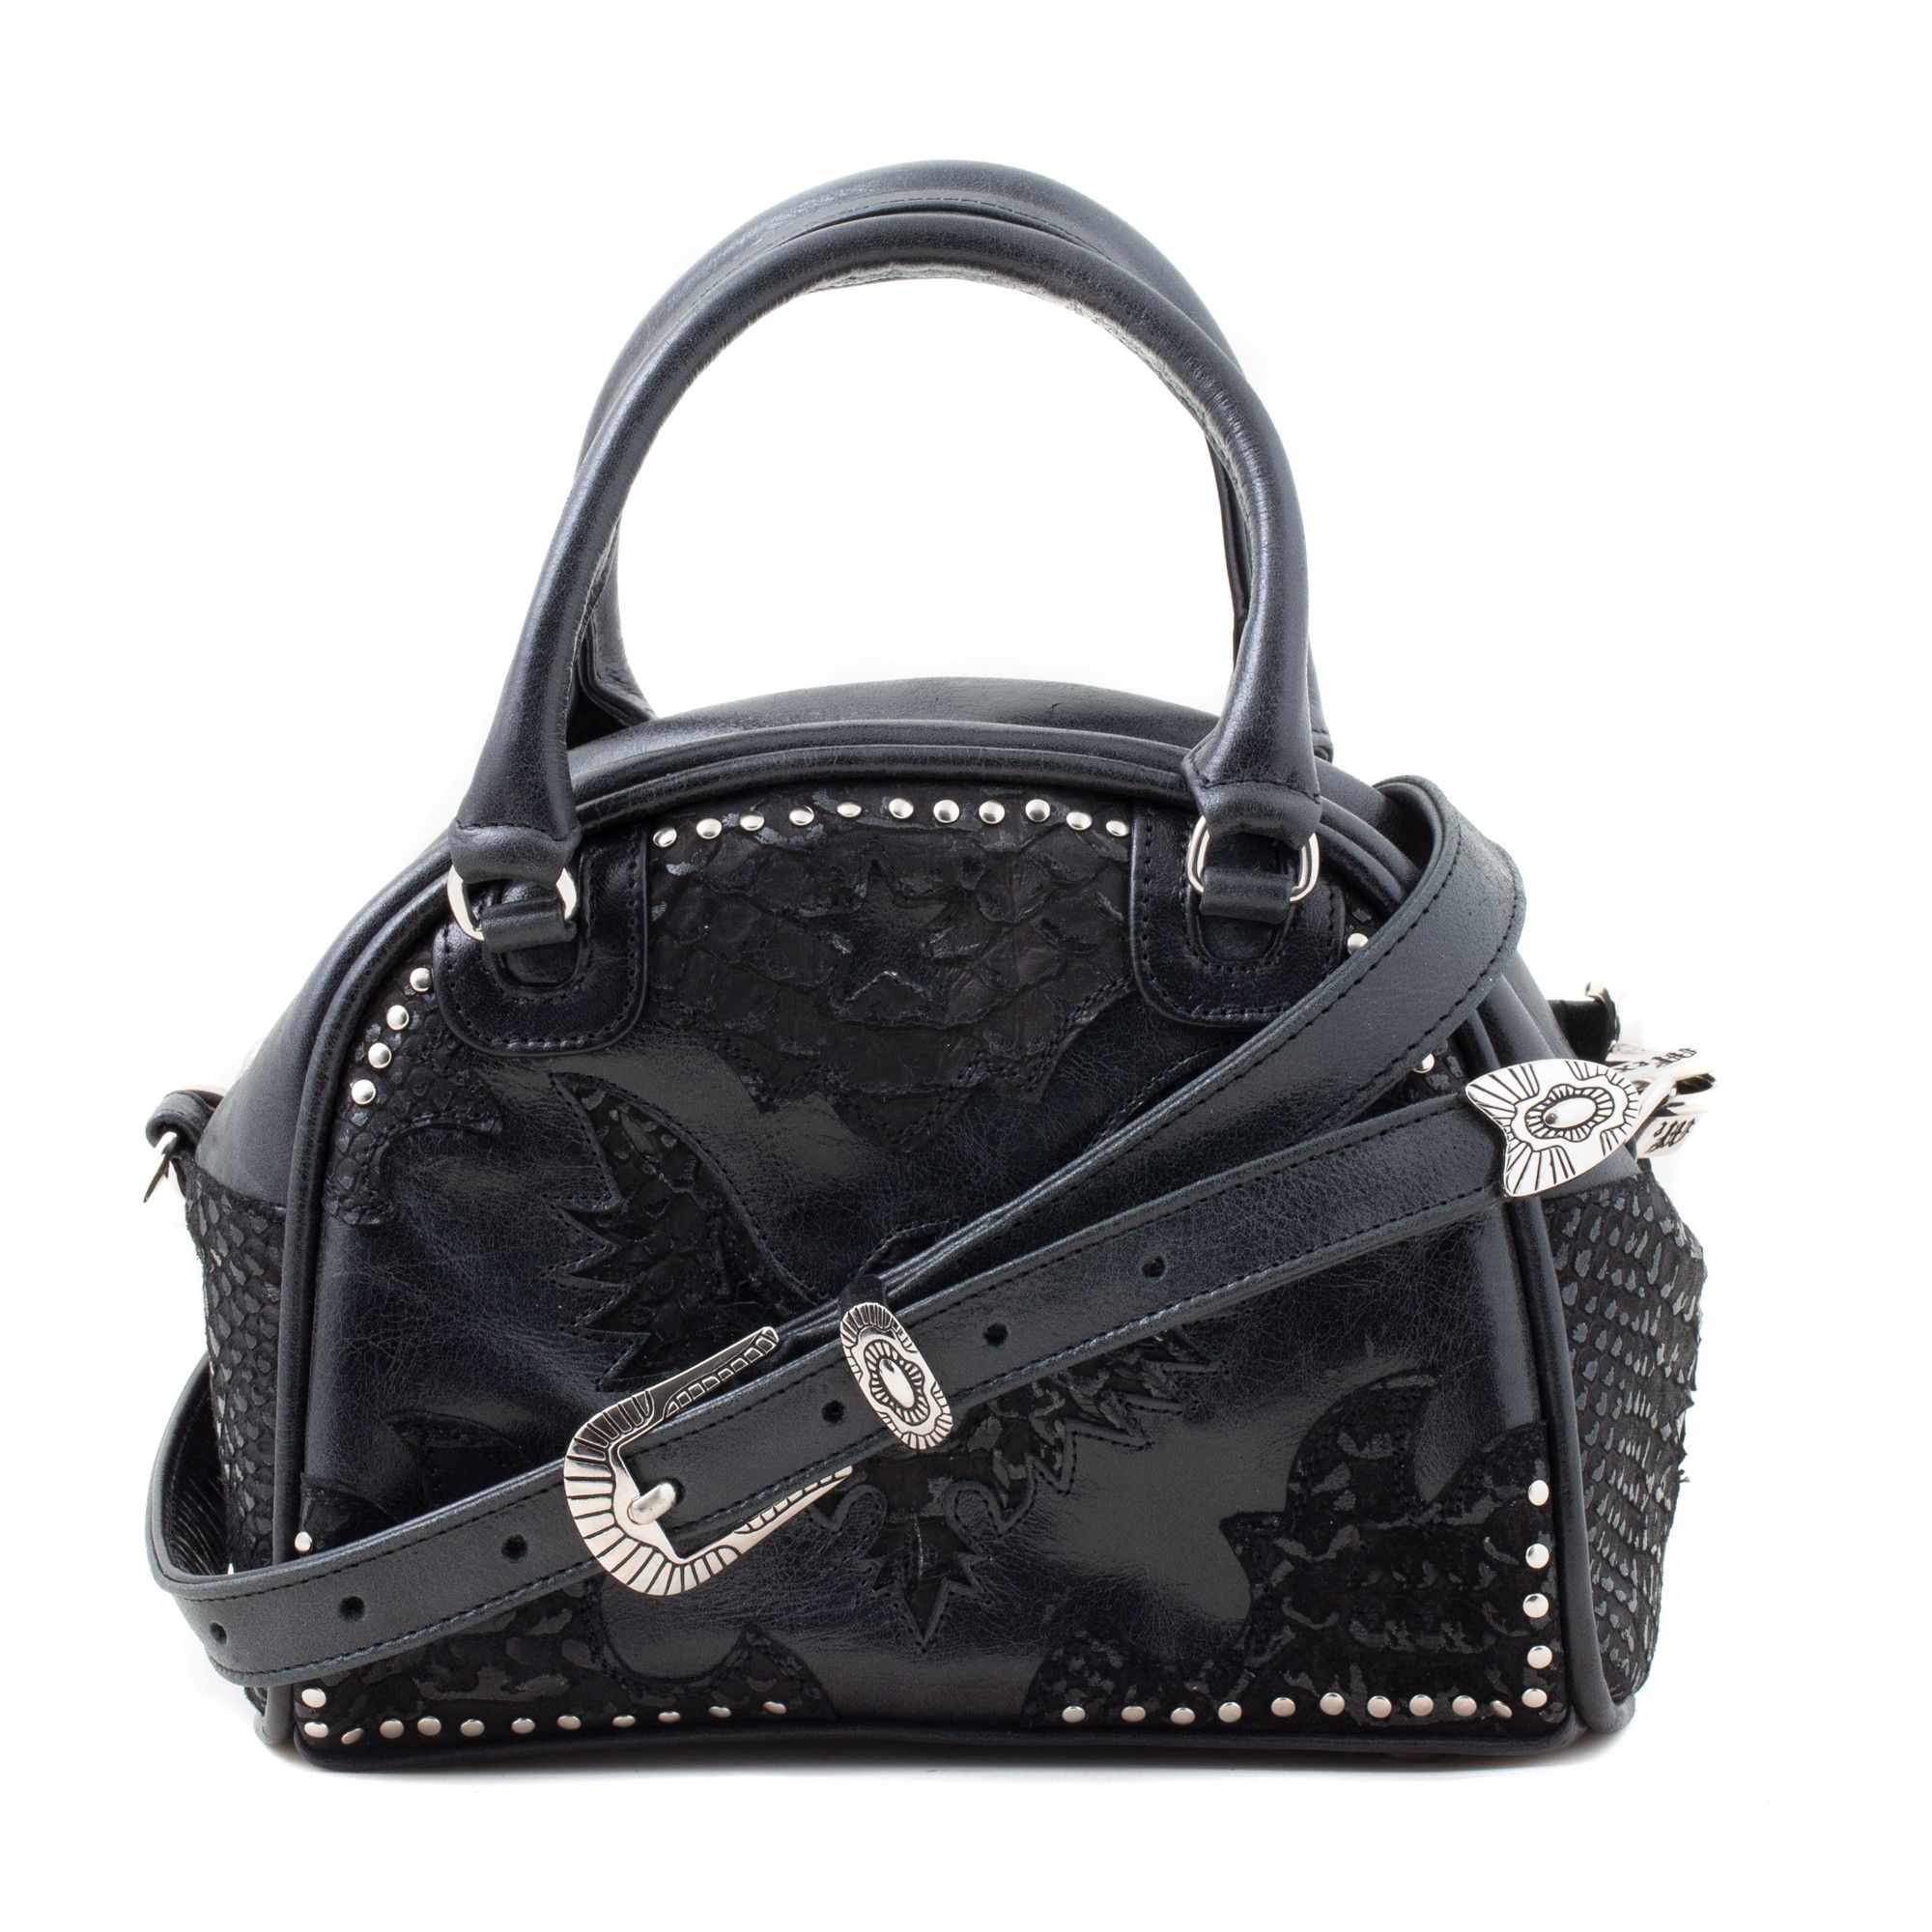 BOWLING BAG EAGLE BLACK EMBOSSED MINI BOWLING BAG WITH LEATHER INLAY AND STUDS    Mix color black / embossed snake  Cowhide leat